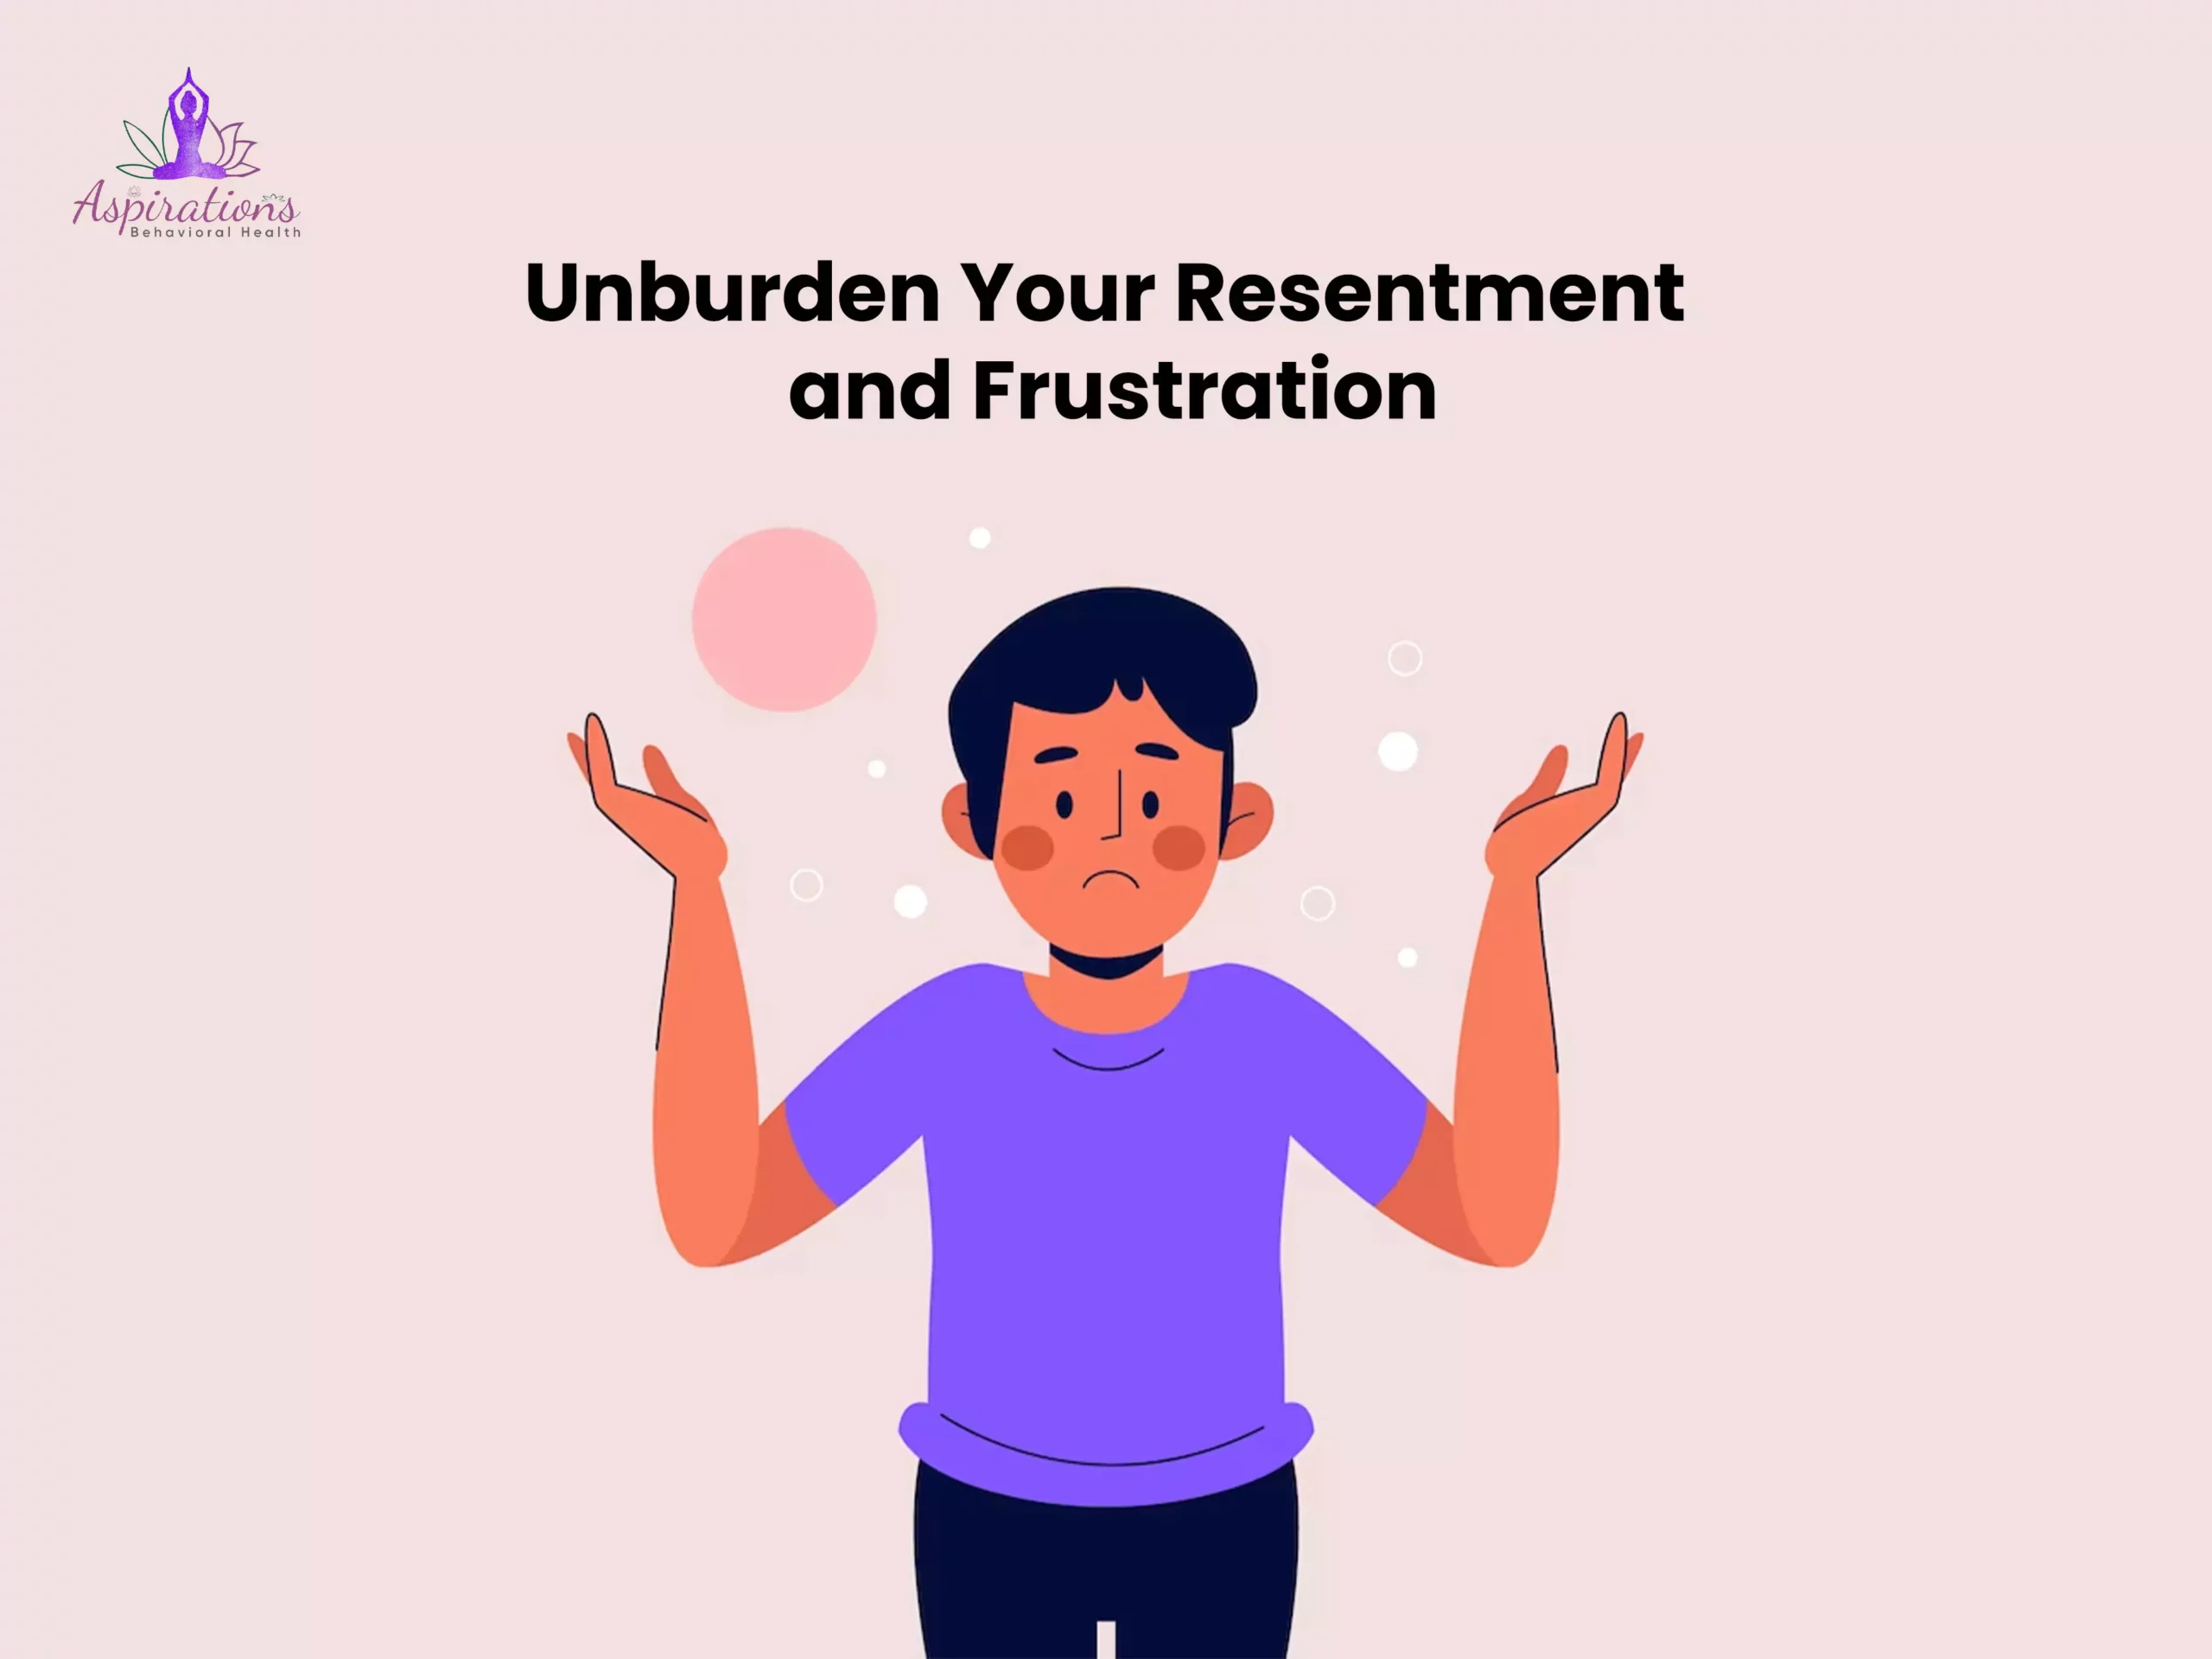 Unburden Your Resentment and Frustration